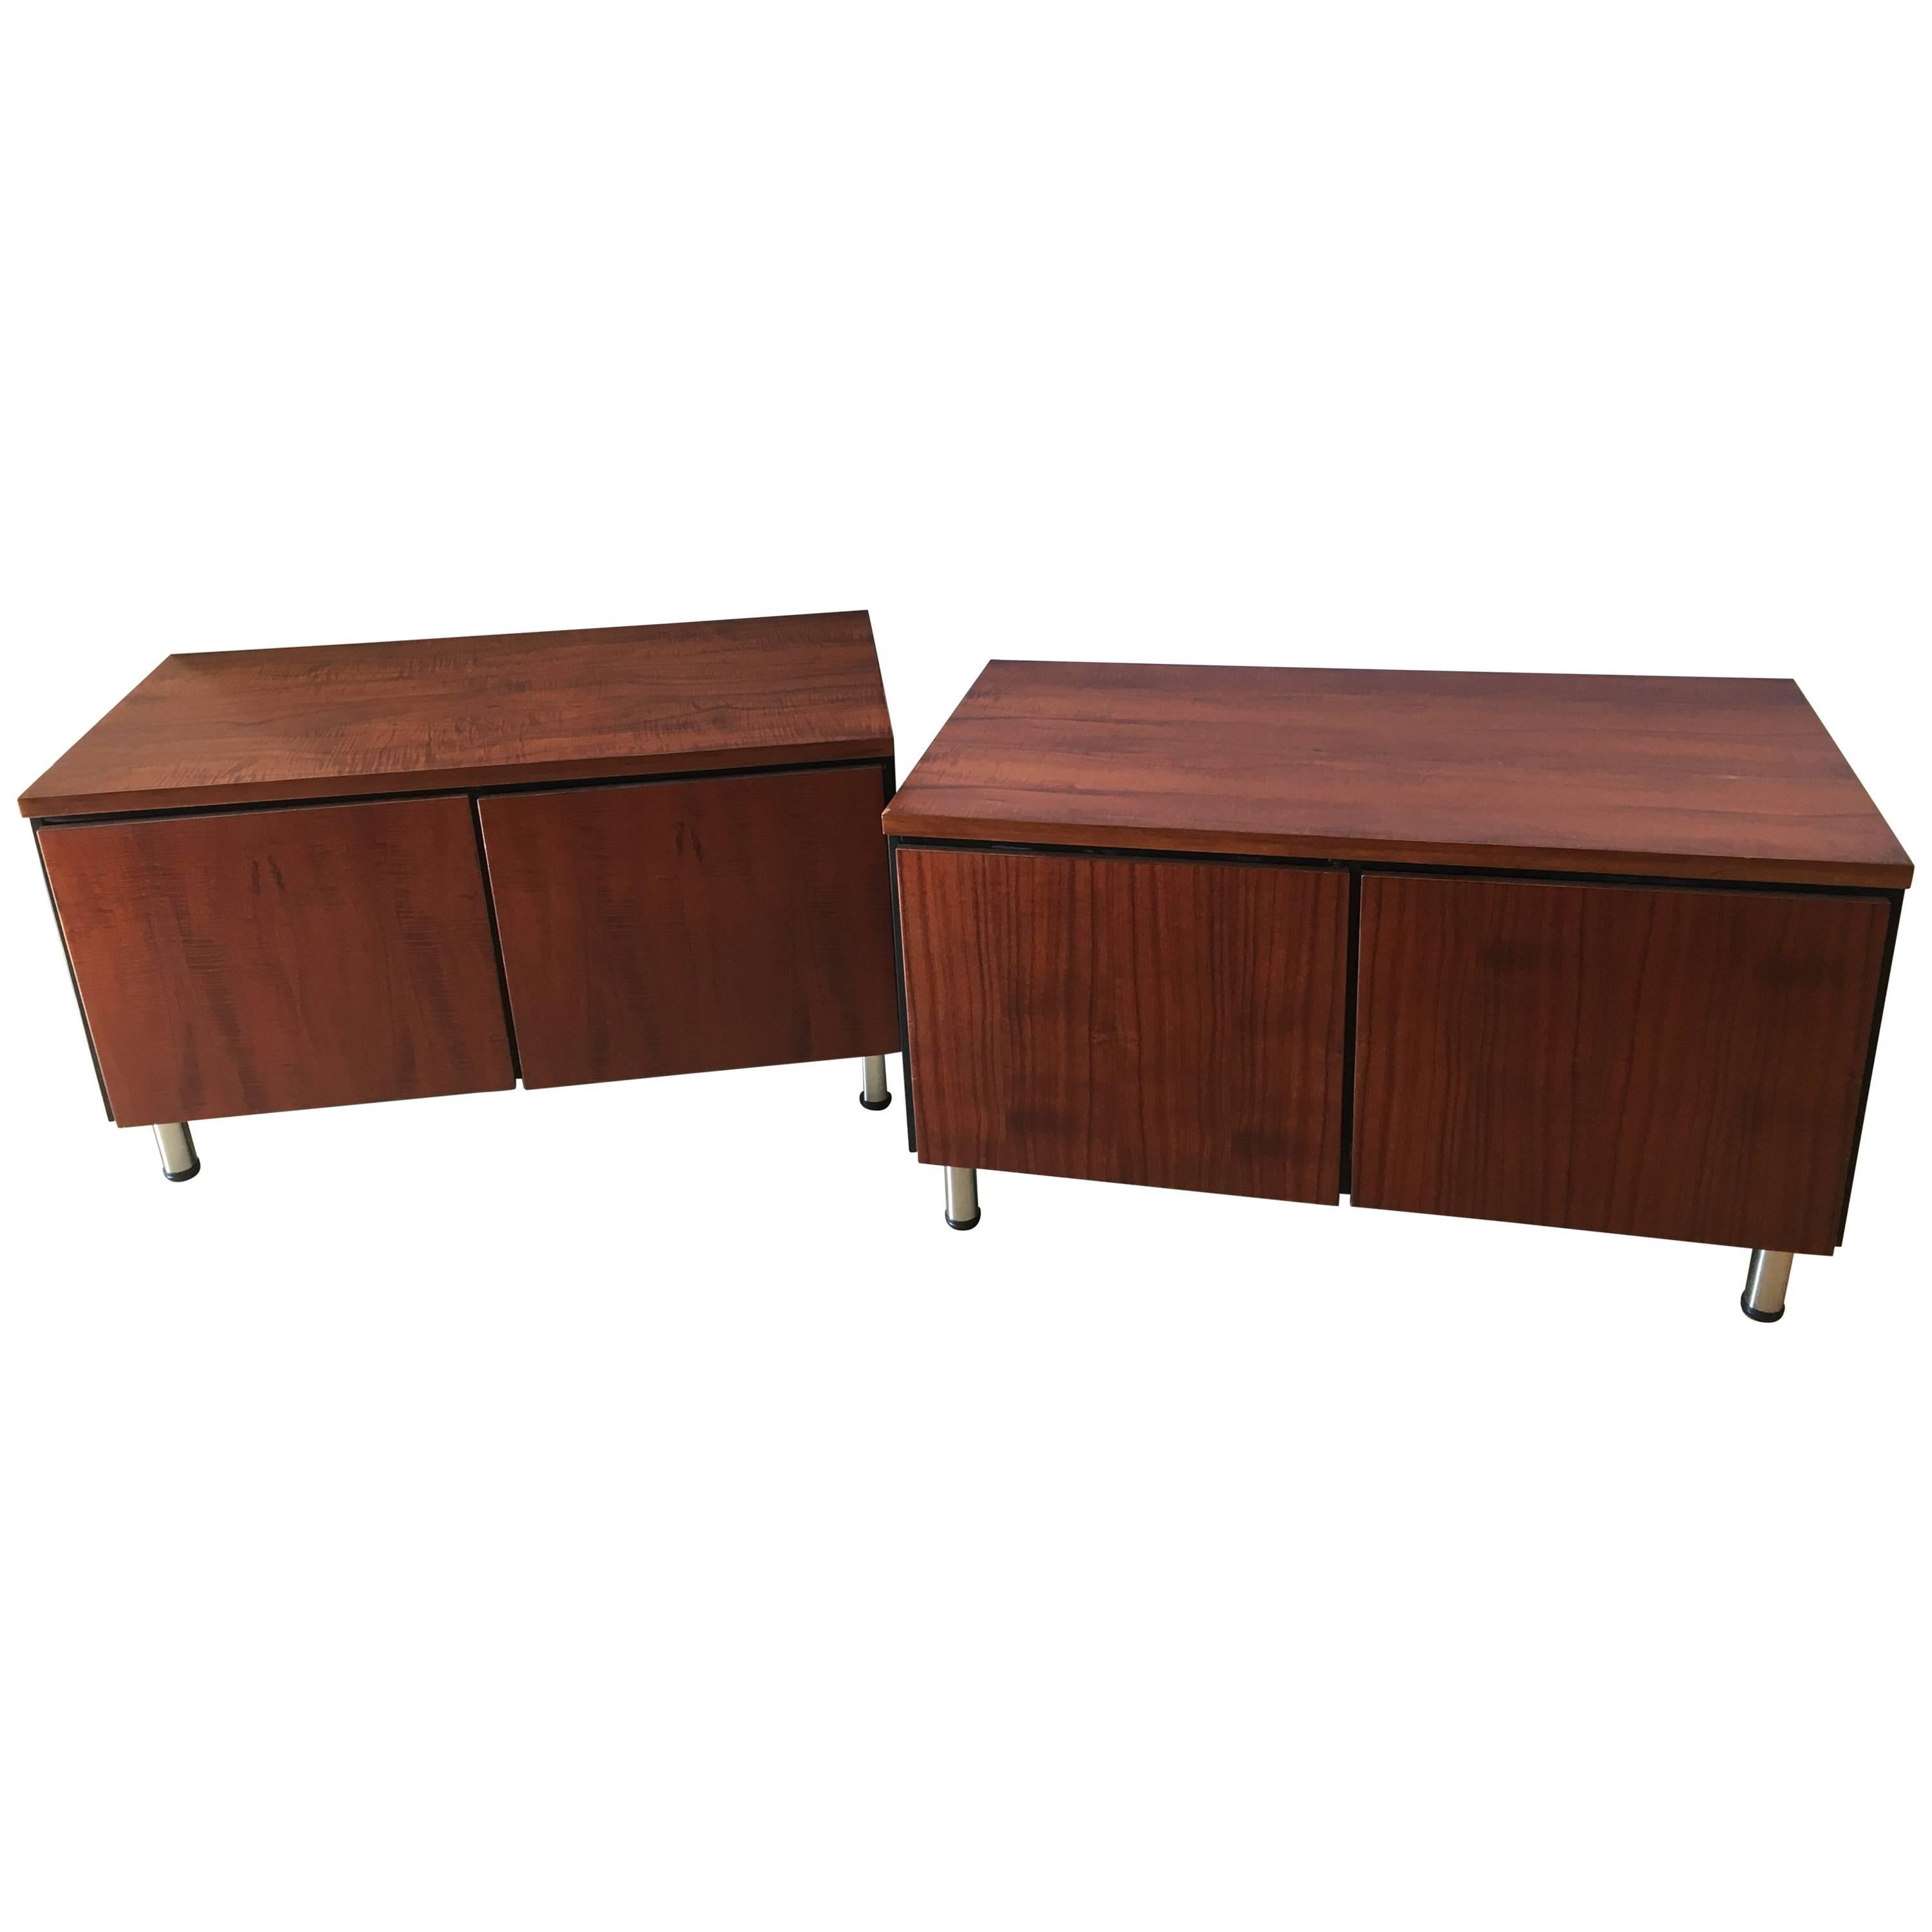 Pair of Mid-Century Modern Rosewood with Chrome Feet Chests